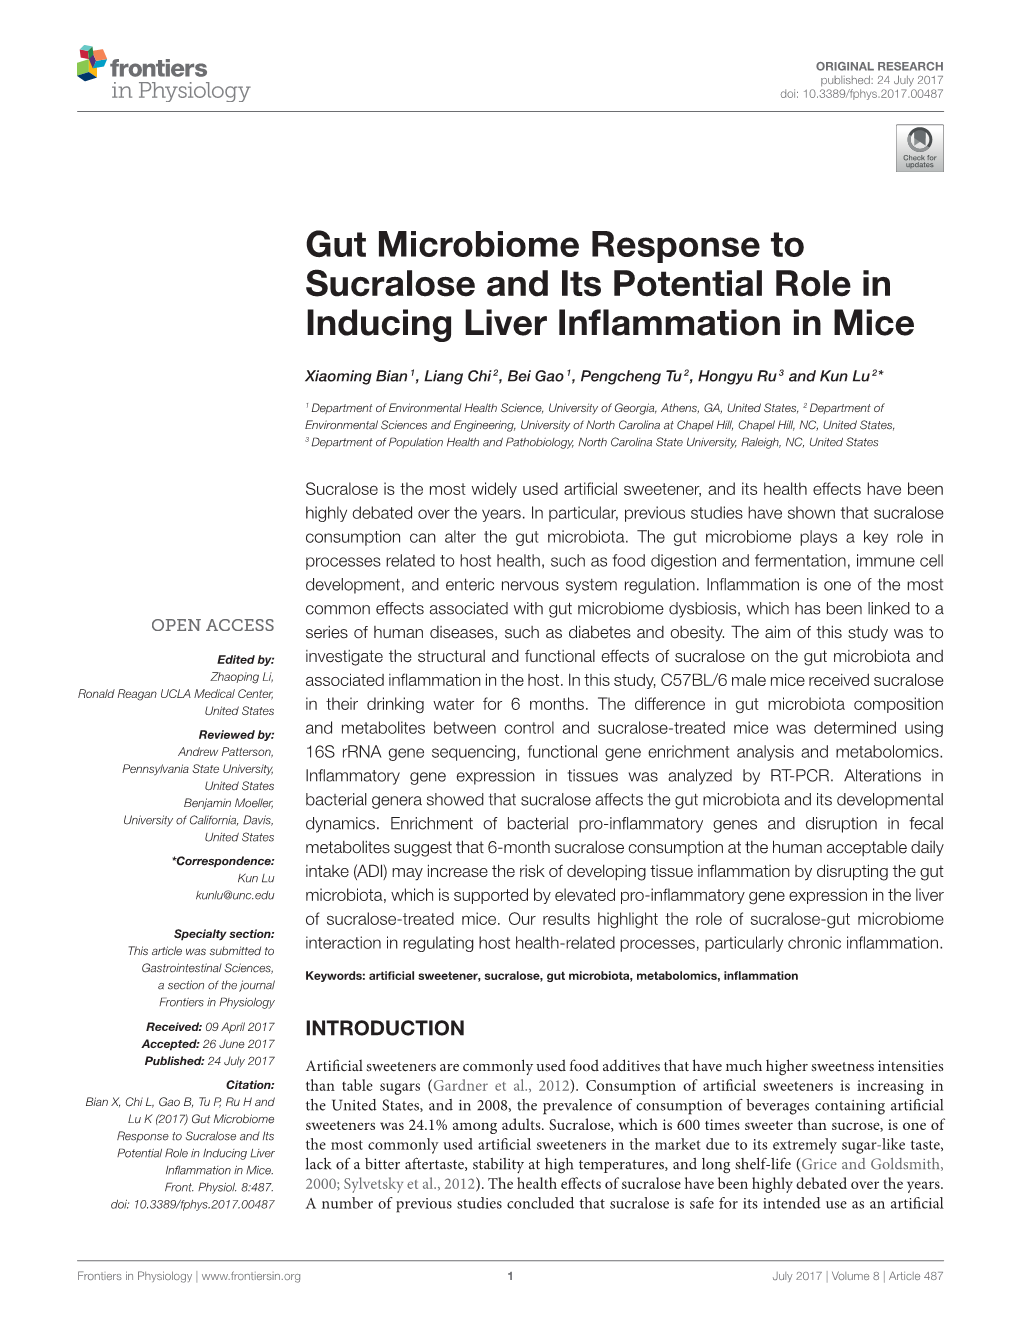 Gut Microbiome Response to Sucralose and Its Potential Role in Inducing Liver Inﬂammation in Mice